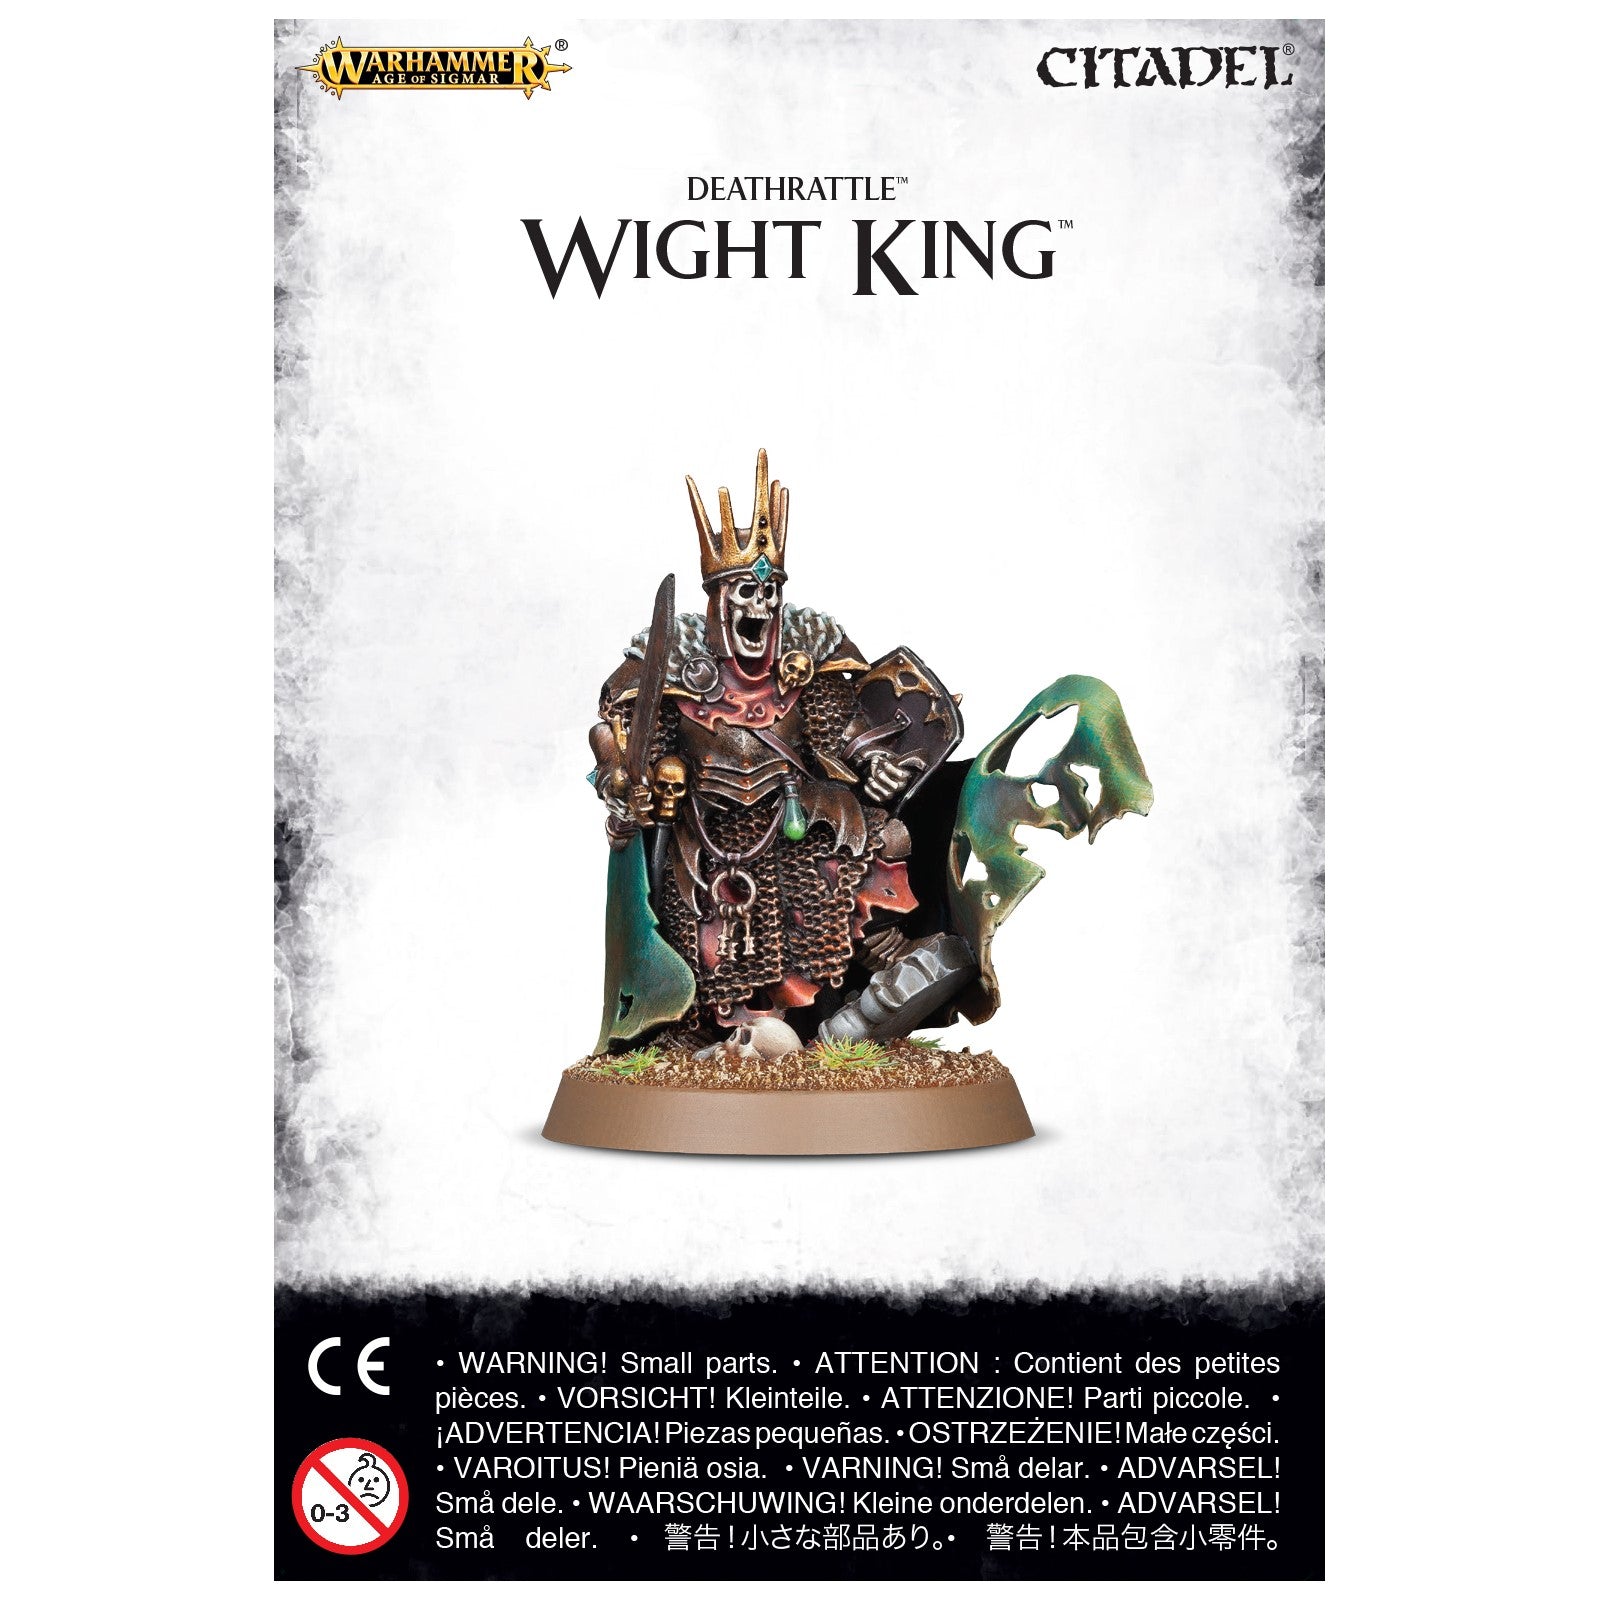 Deathrattle Wight King with Baleful Tomb blade